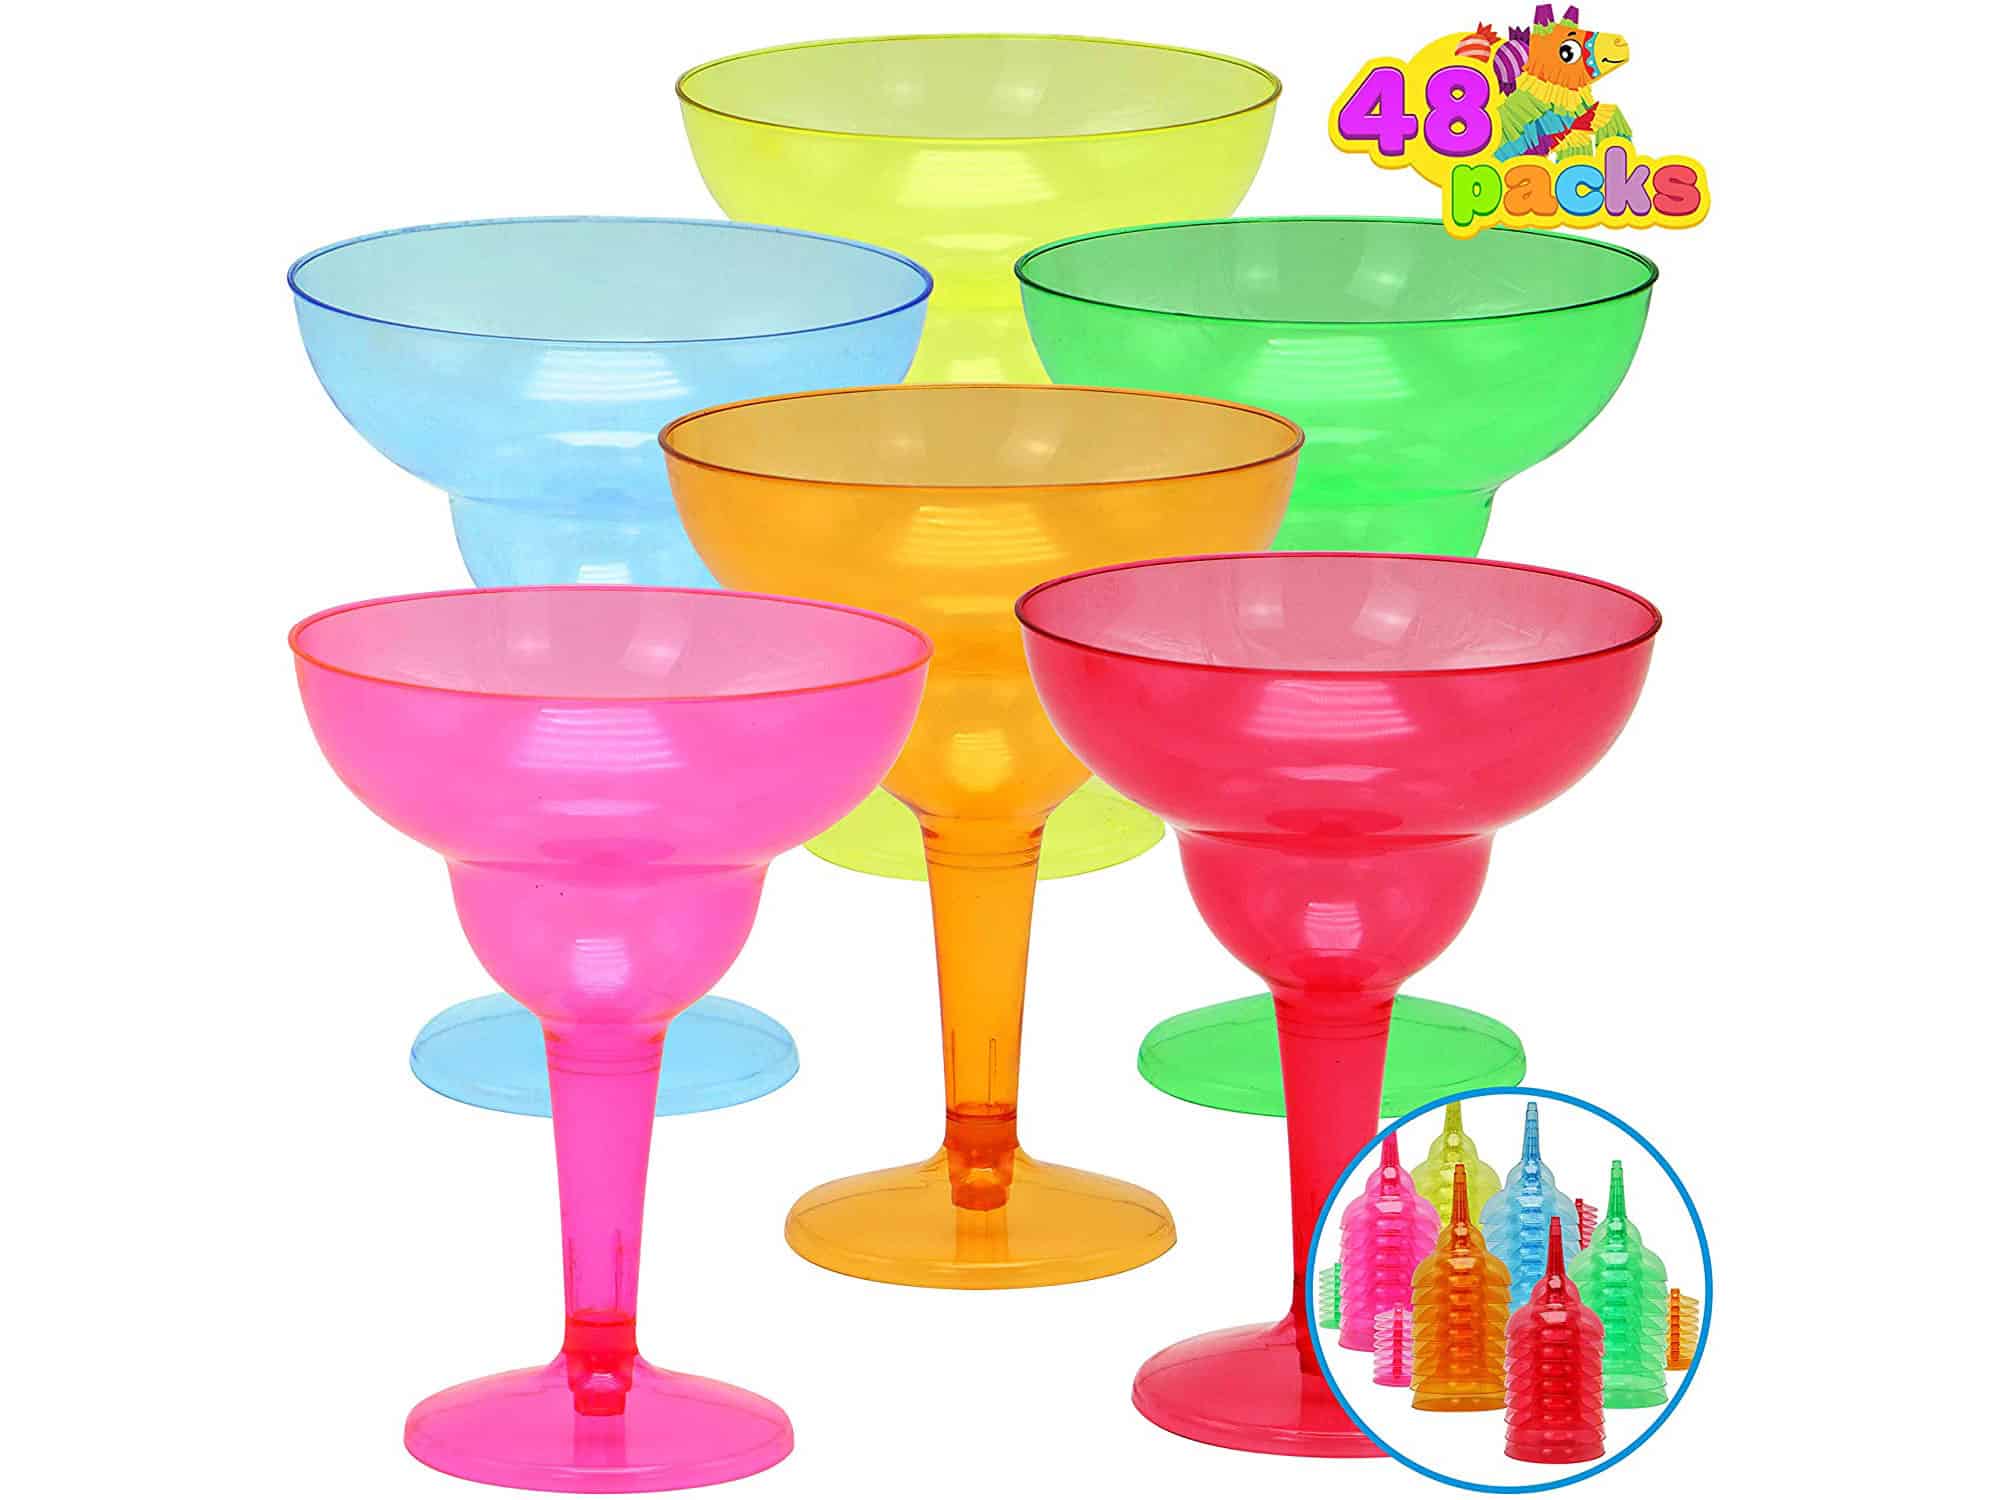 48 Packs Plastic Margarita Glasses Cups 12 oz Disposable Colorful Cinco De Mayo Fiesta Party Decoration for Fun Taco Party Supplies, Neon Cocktail Cups, Mexican Theme for Carnivals, Día De Muertos